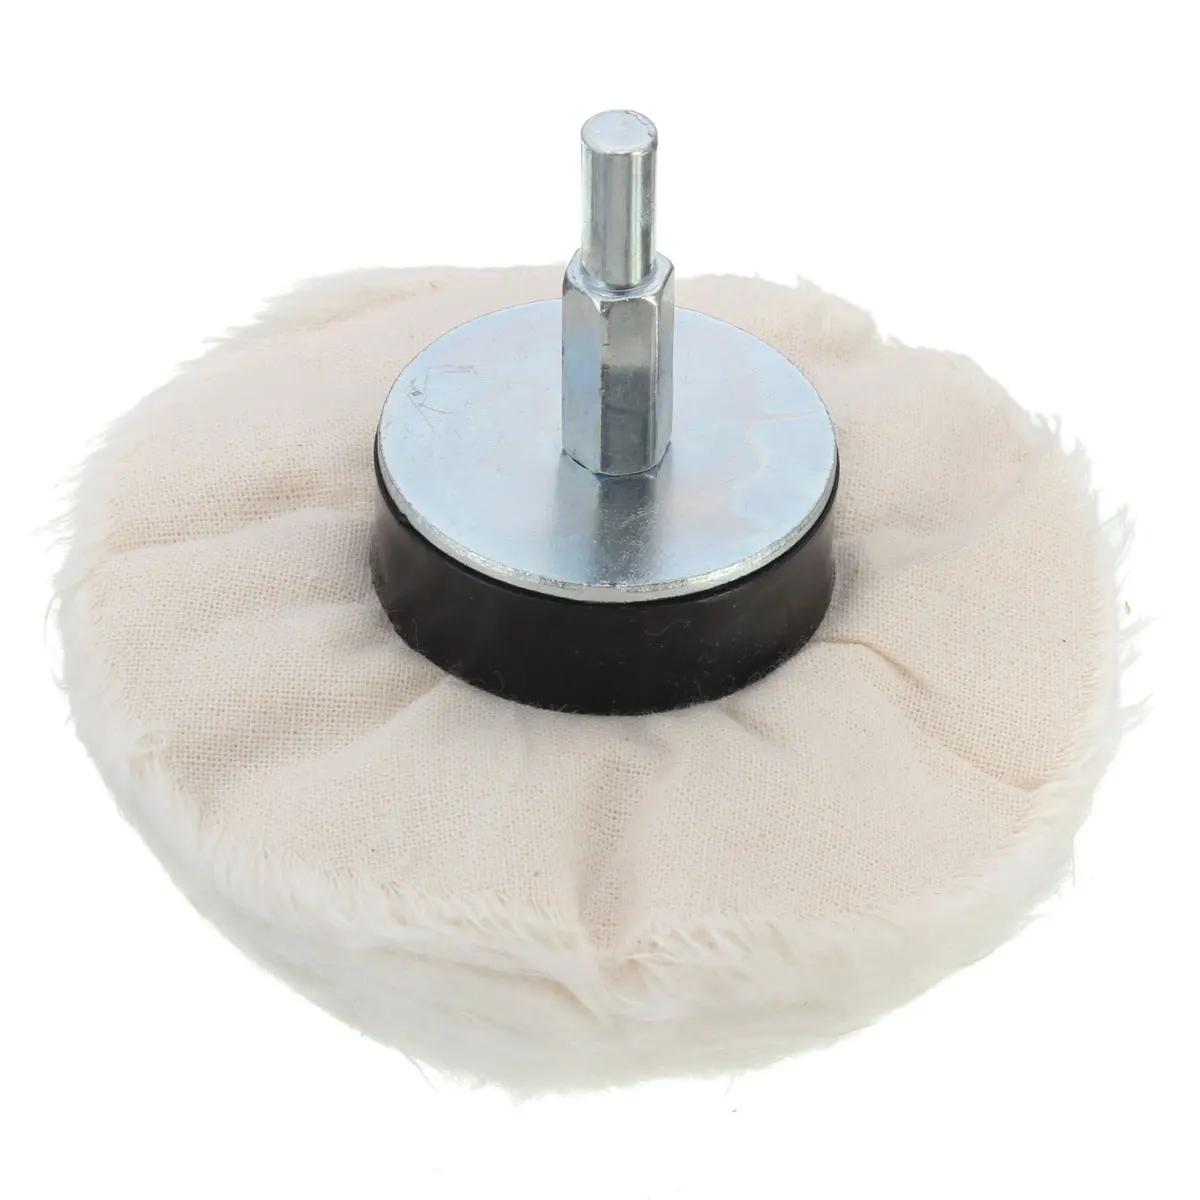 HSEAMALL 10PCS Buffing Wheel for Drill White Polishing Wheel,Cotton Dome Polishing Mop,Cone Polishing Wheel Buffing Pad with 1/4 inch